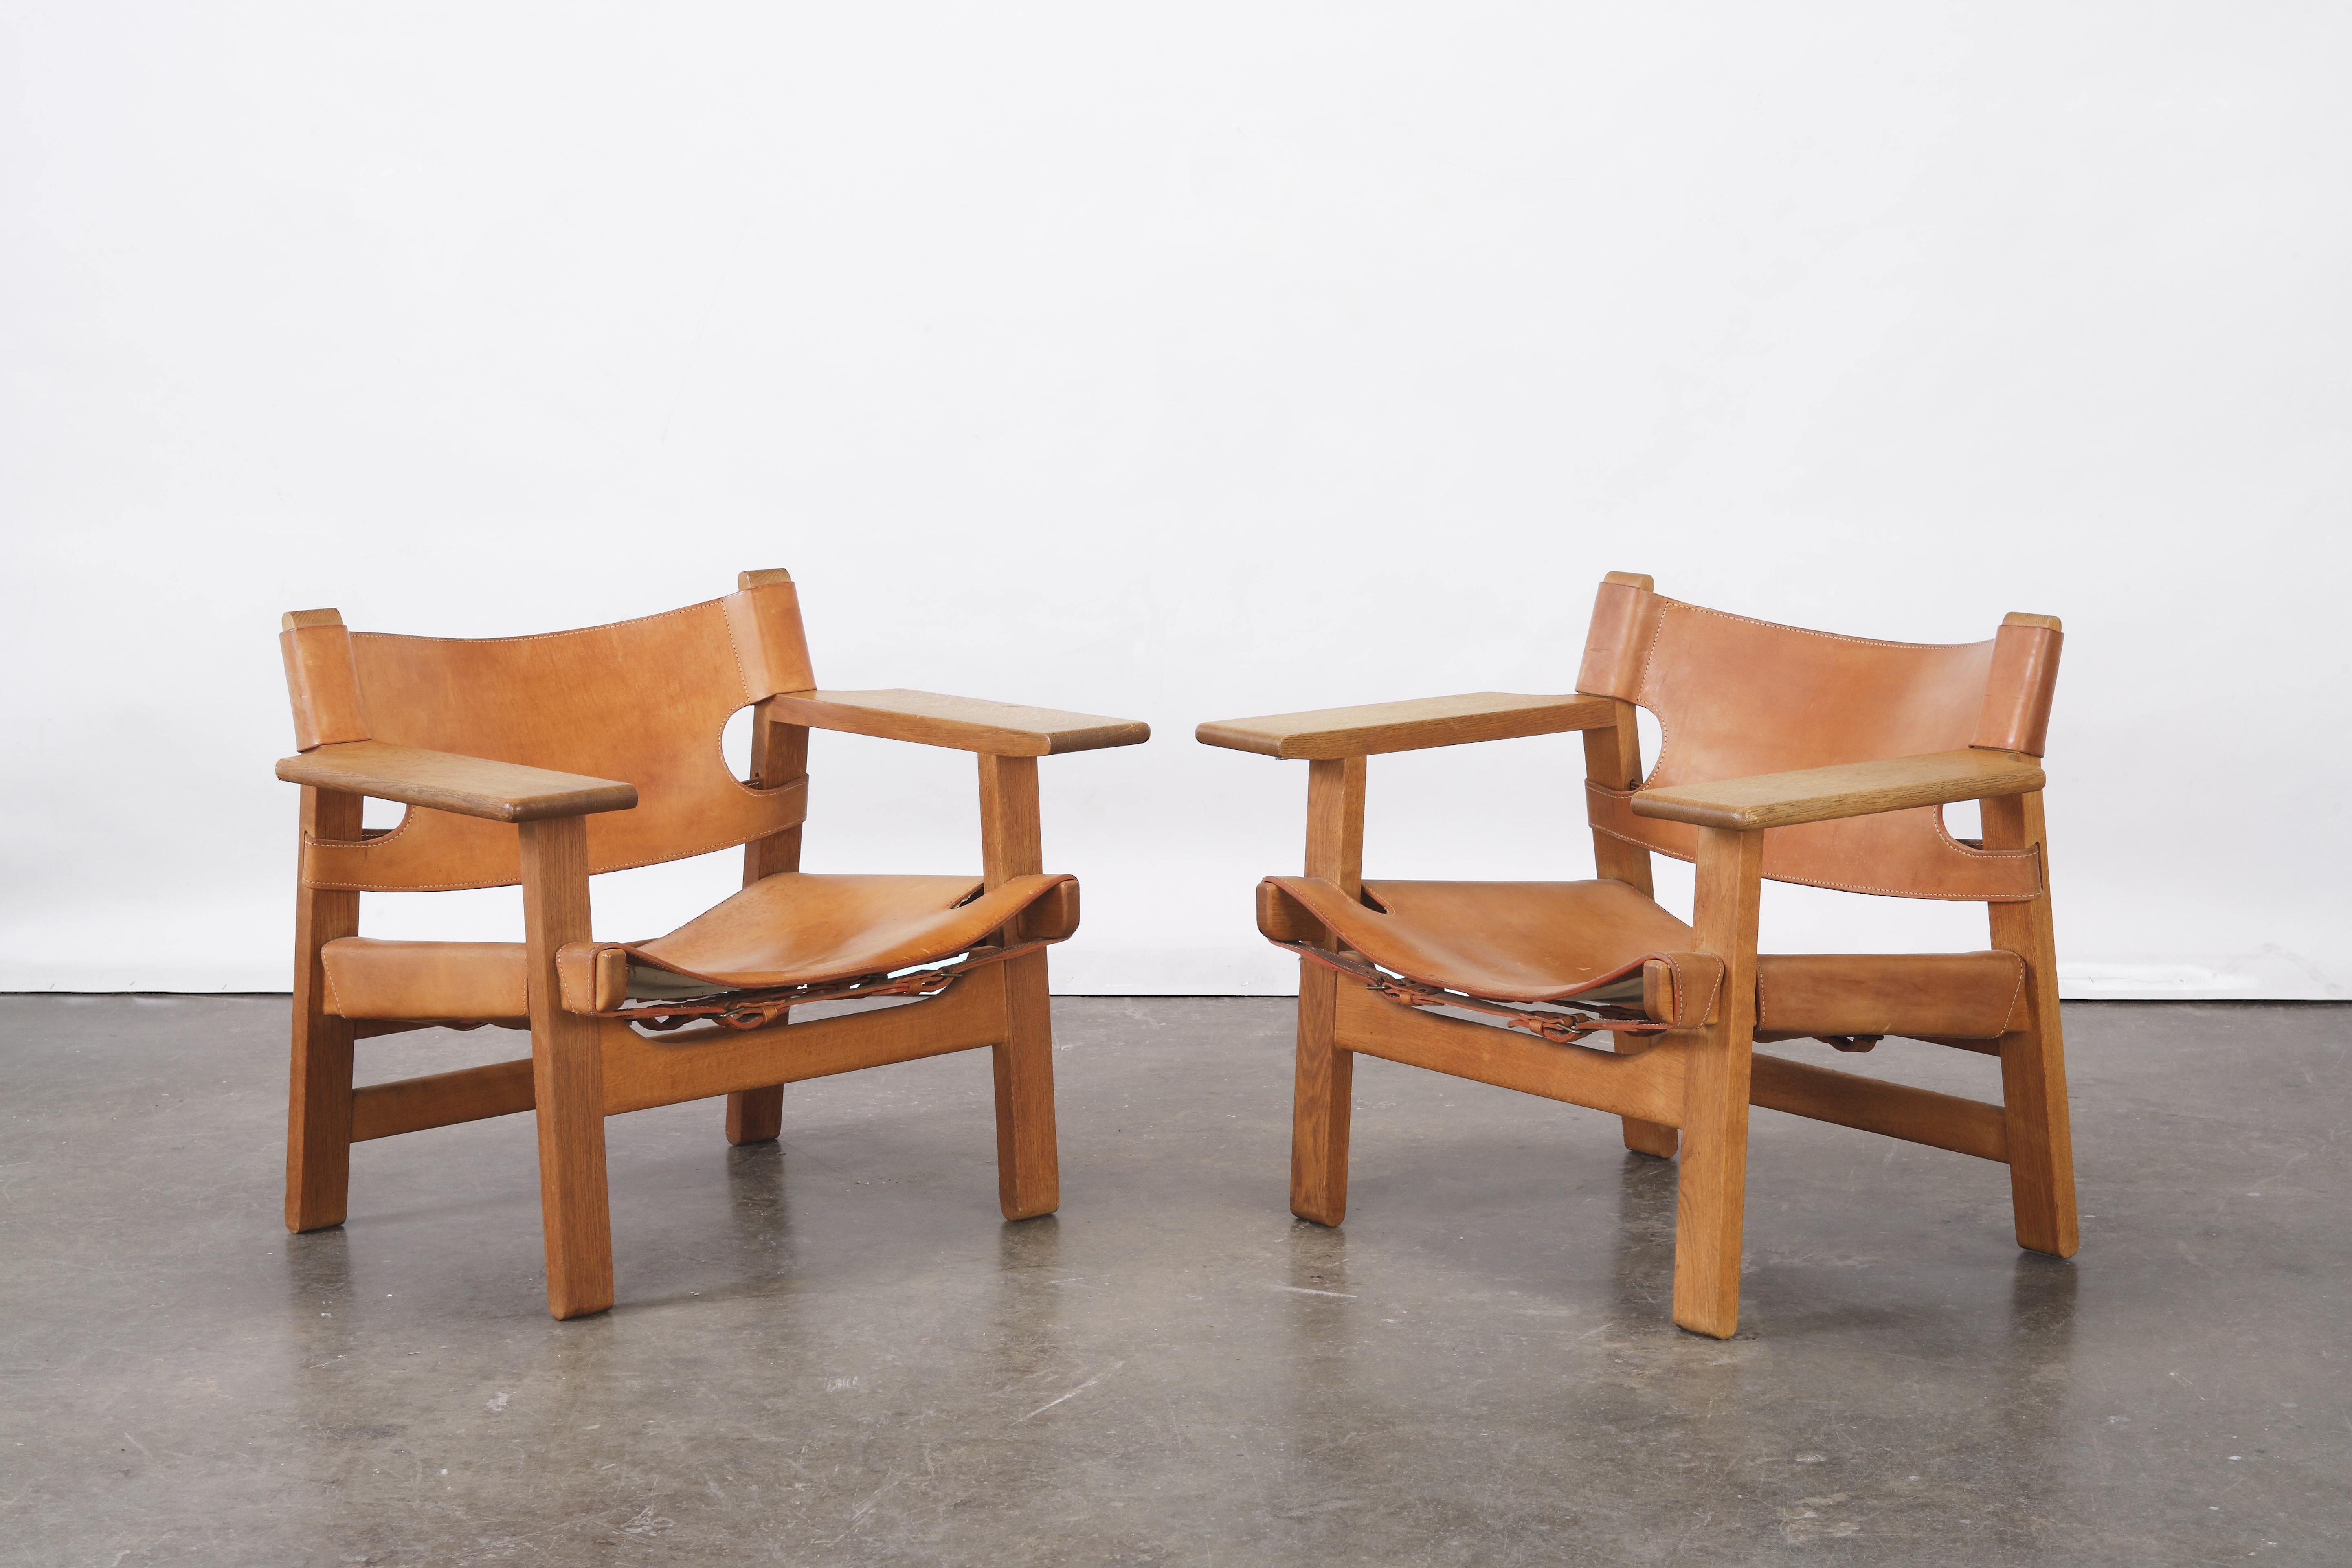 A wonderful pair of early Spanish chairs, in solid oak and patinated cognac leather, designed by Børge Mogensen for Fredericia Stolefabrik, Denmark, in 1958. In very good original condition, a beautiful even patina, a couple of minor spots to the